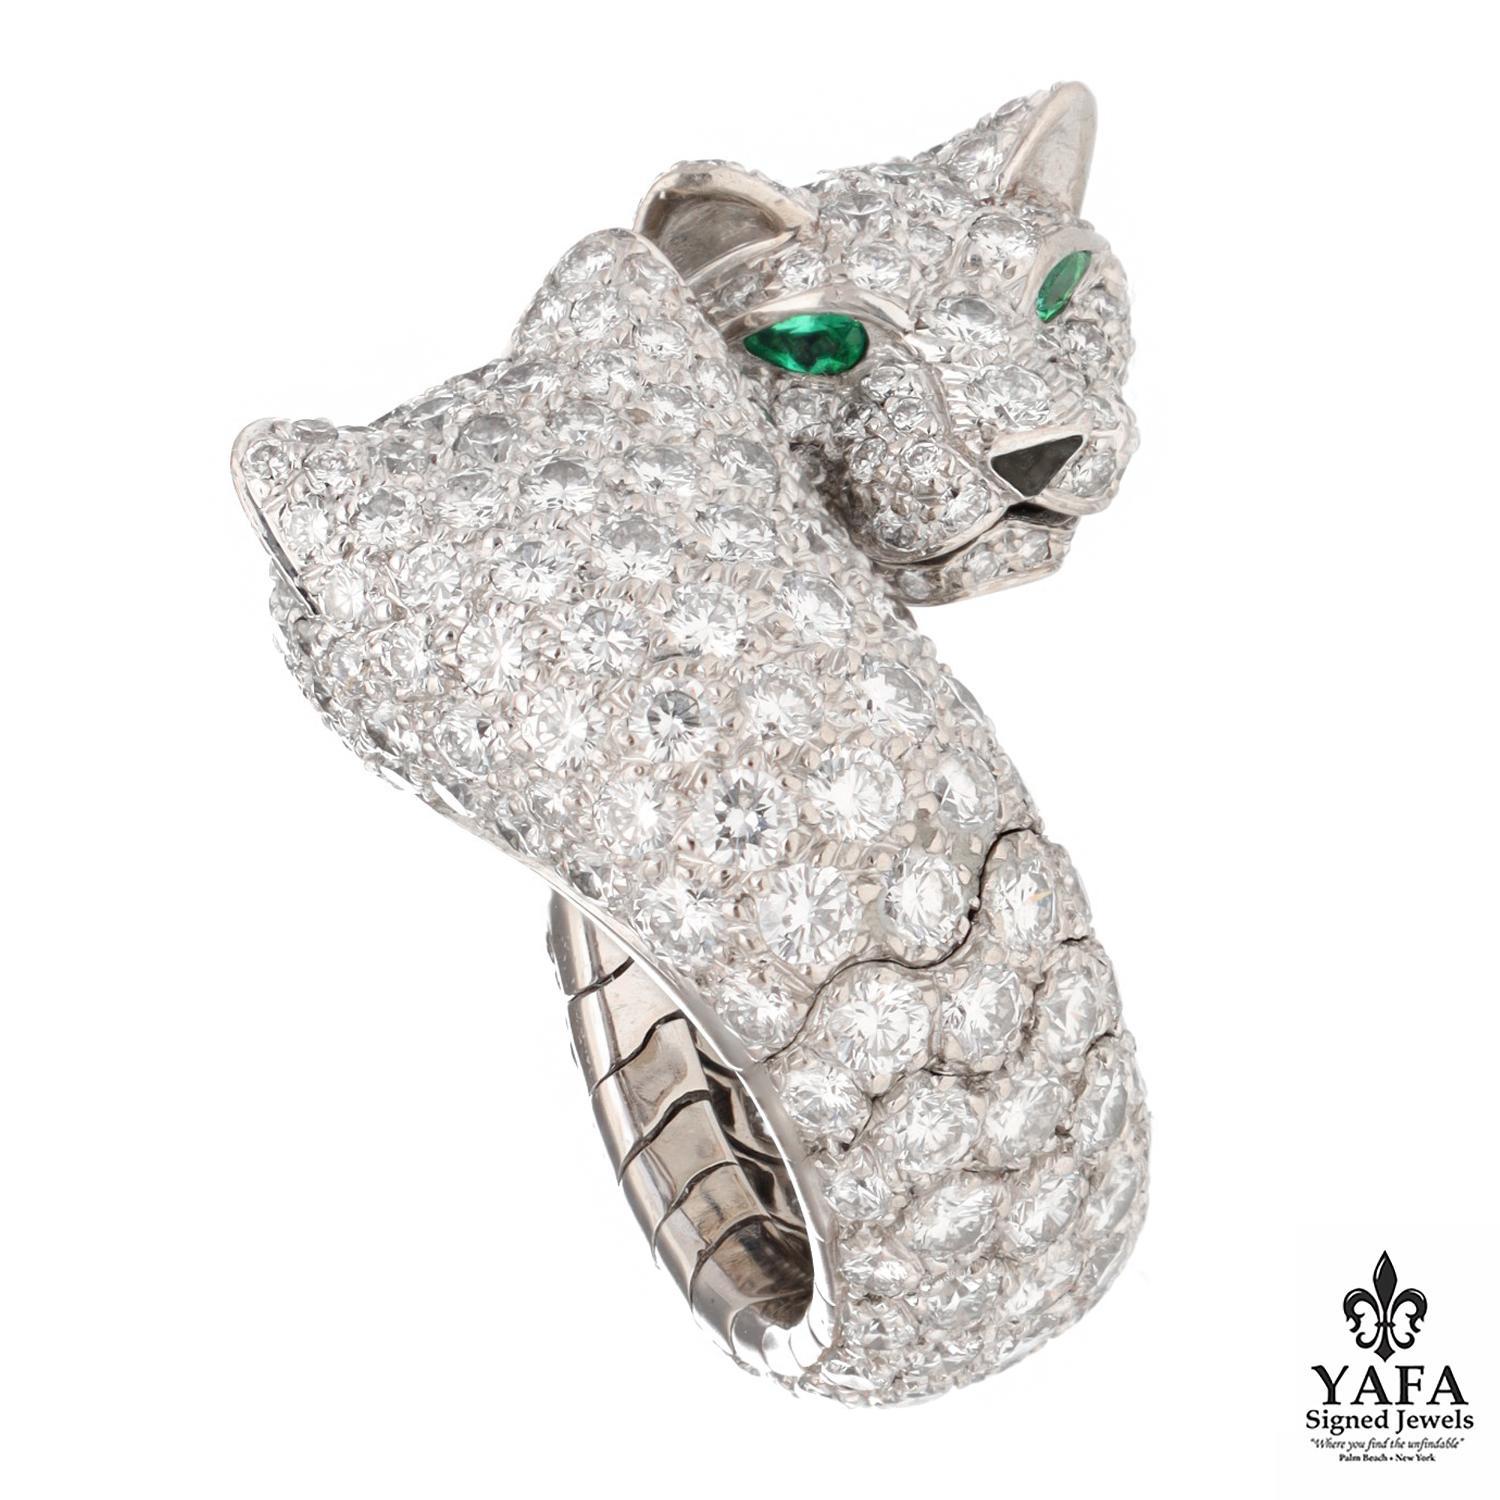 Cartier Double Panthere Lakarda 18k Gold and Diamond Ring.
Round Brilliant Cut Diamonds. Approximate Diamond Weight 8 CTS,  E Color, VVS1 Clarity.
2 emerald eyes.
2 black onyx noses.
Ring Size - 47 / 4
French Assay Marks
Signed - Cartier